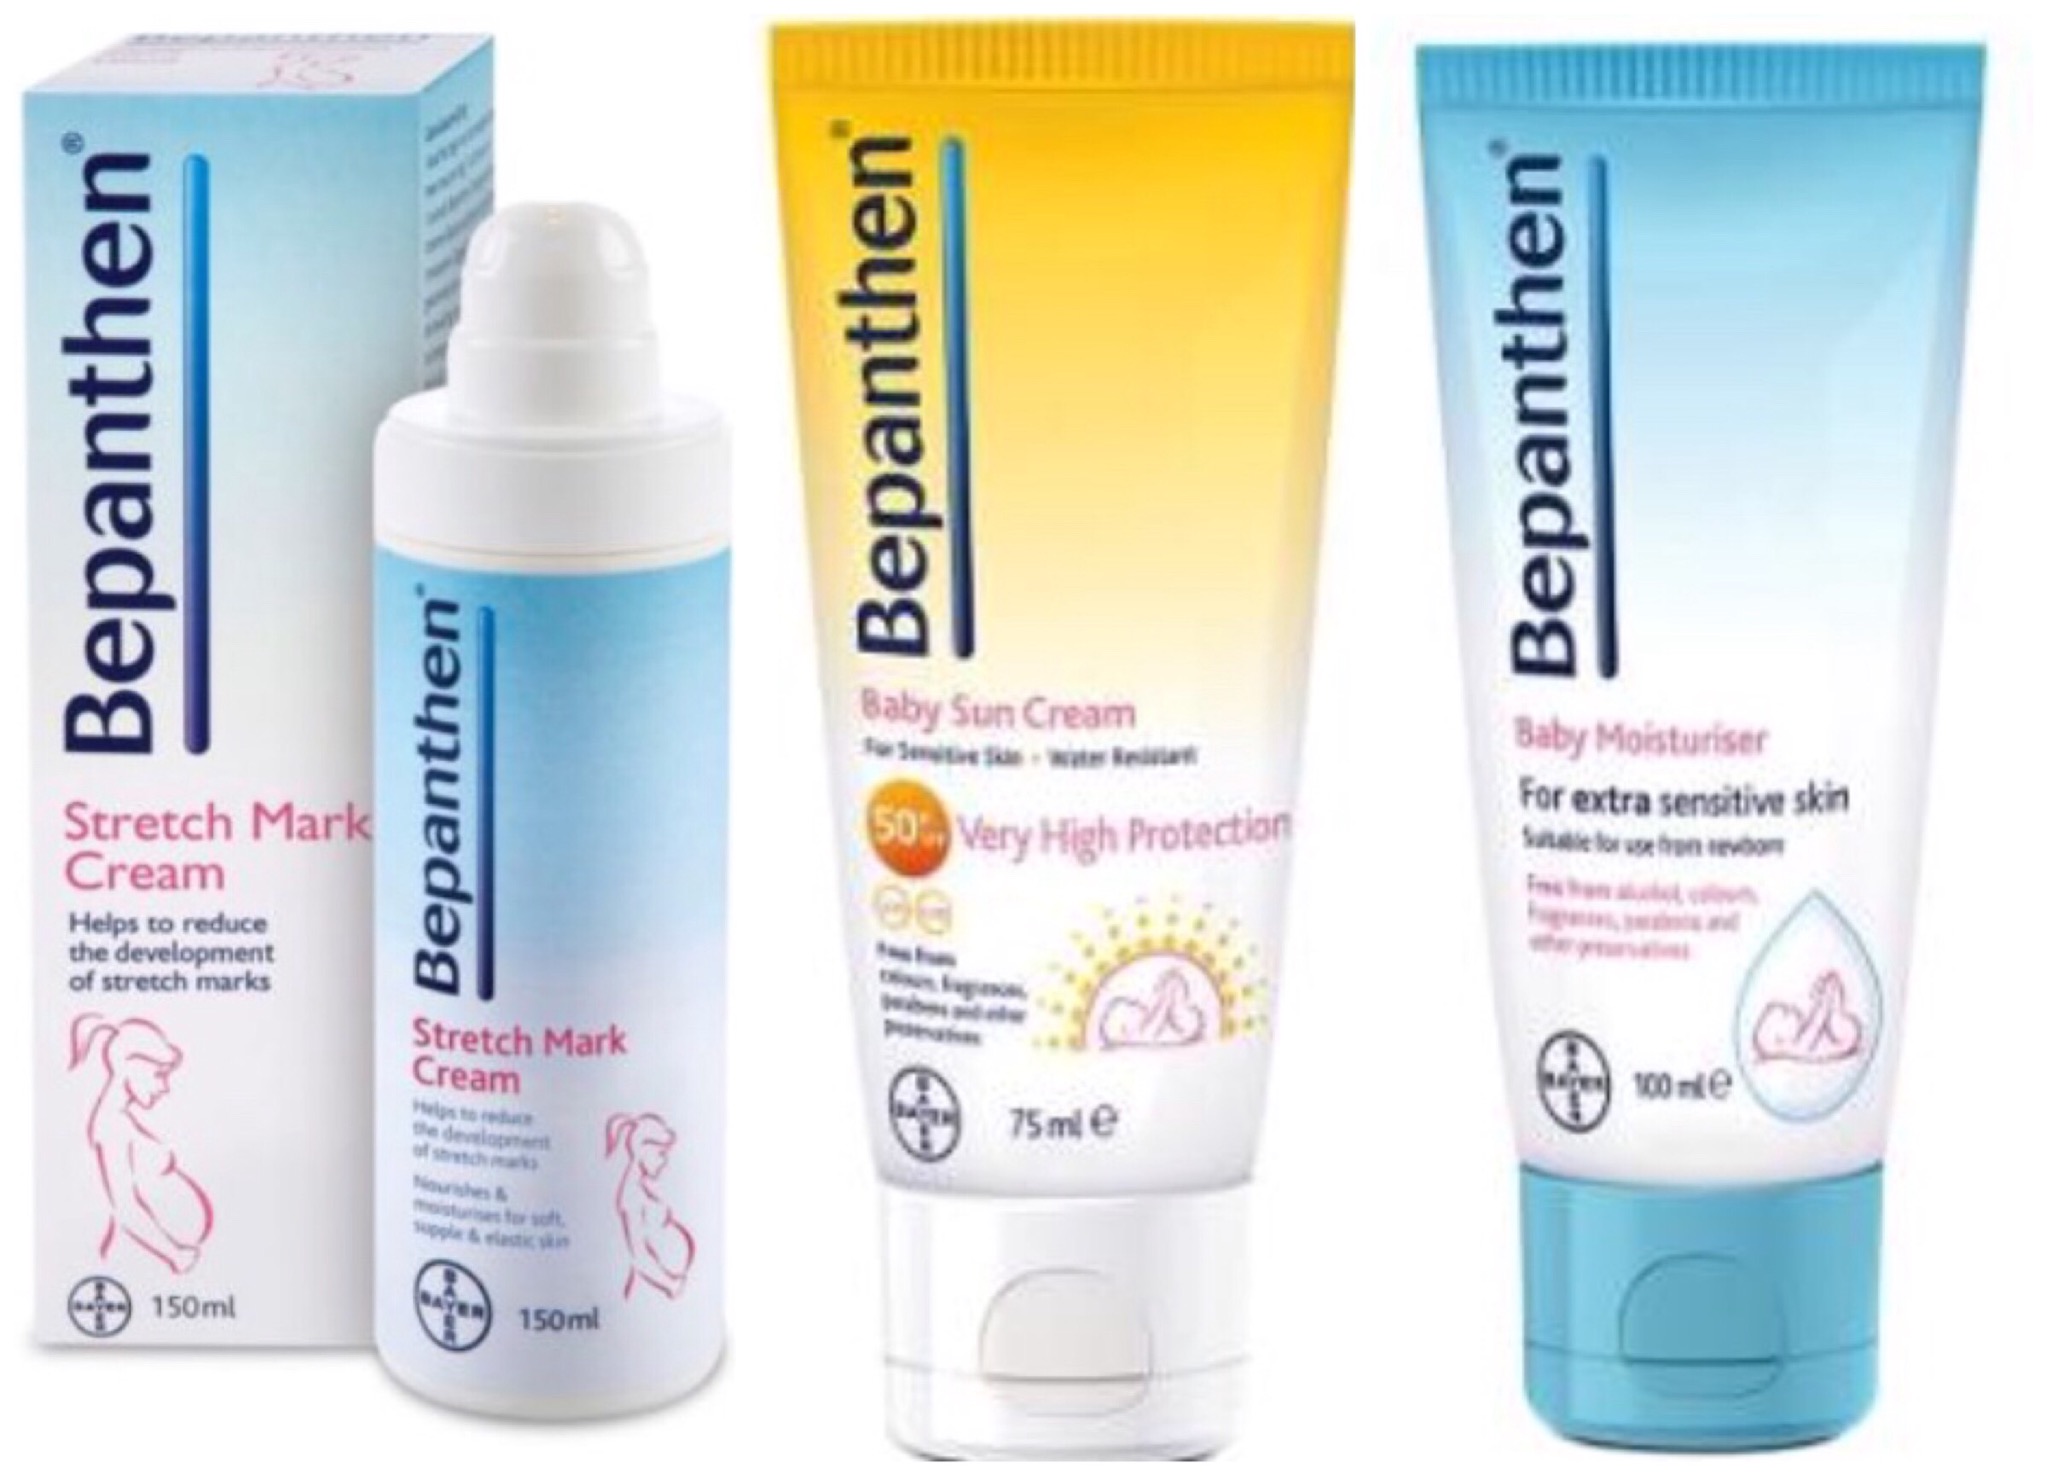 Bepanthen pregnancy and baby skincare products